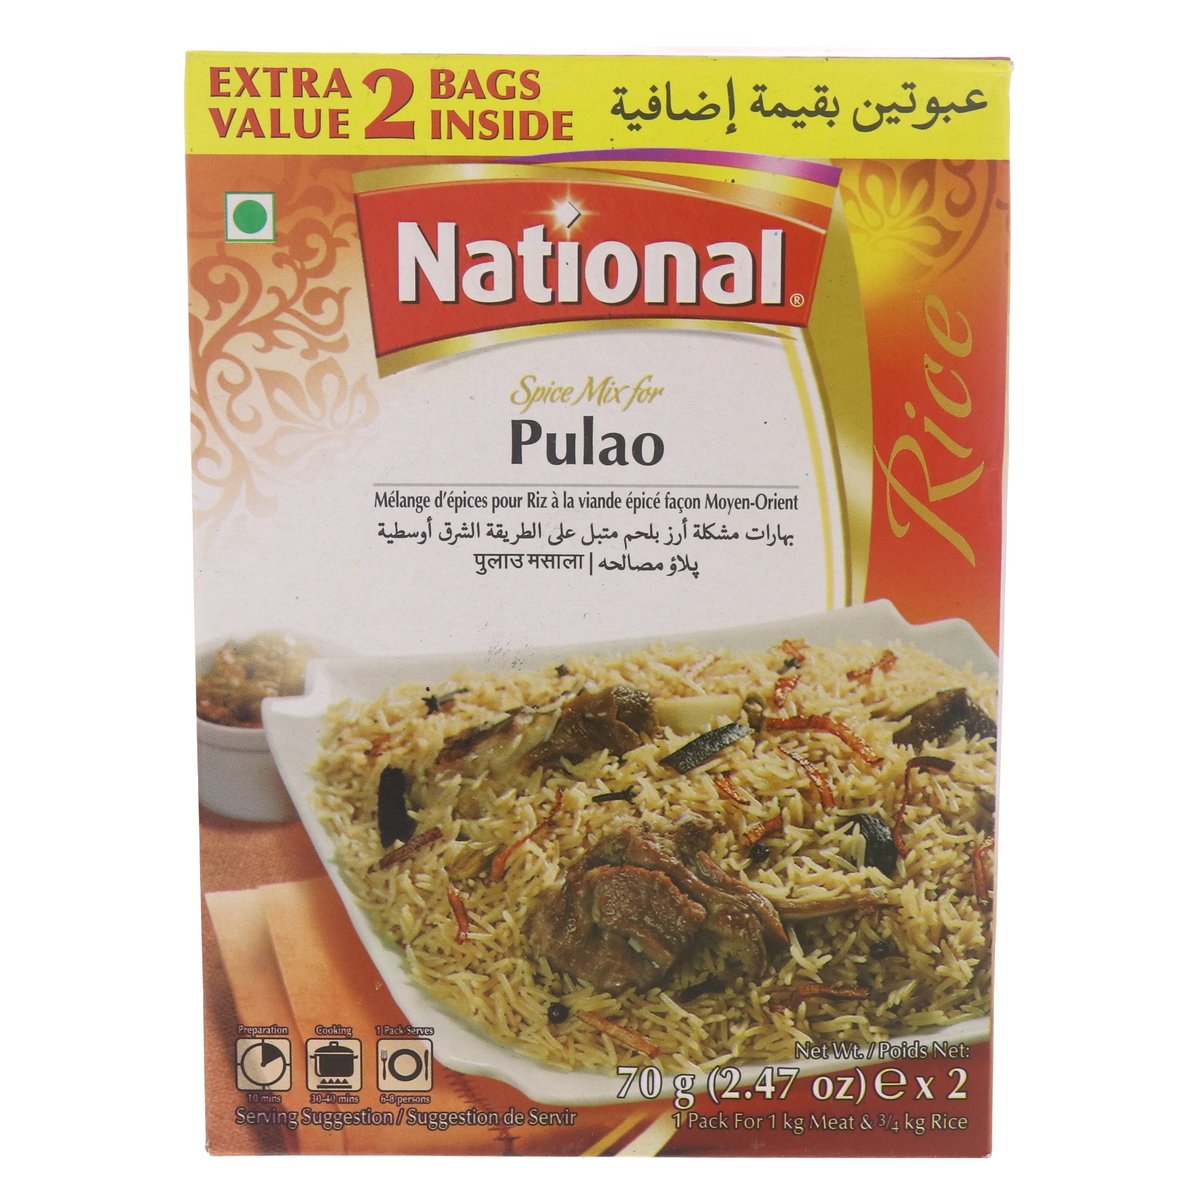 National Spice Mix For Pulao 140 g